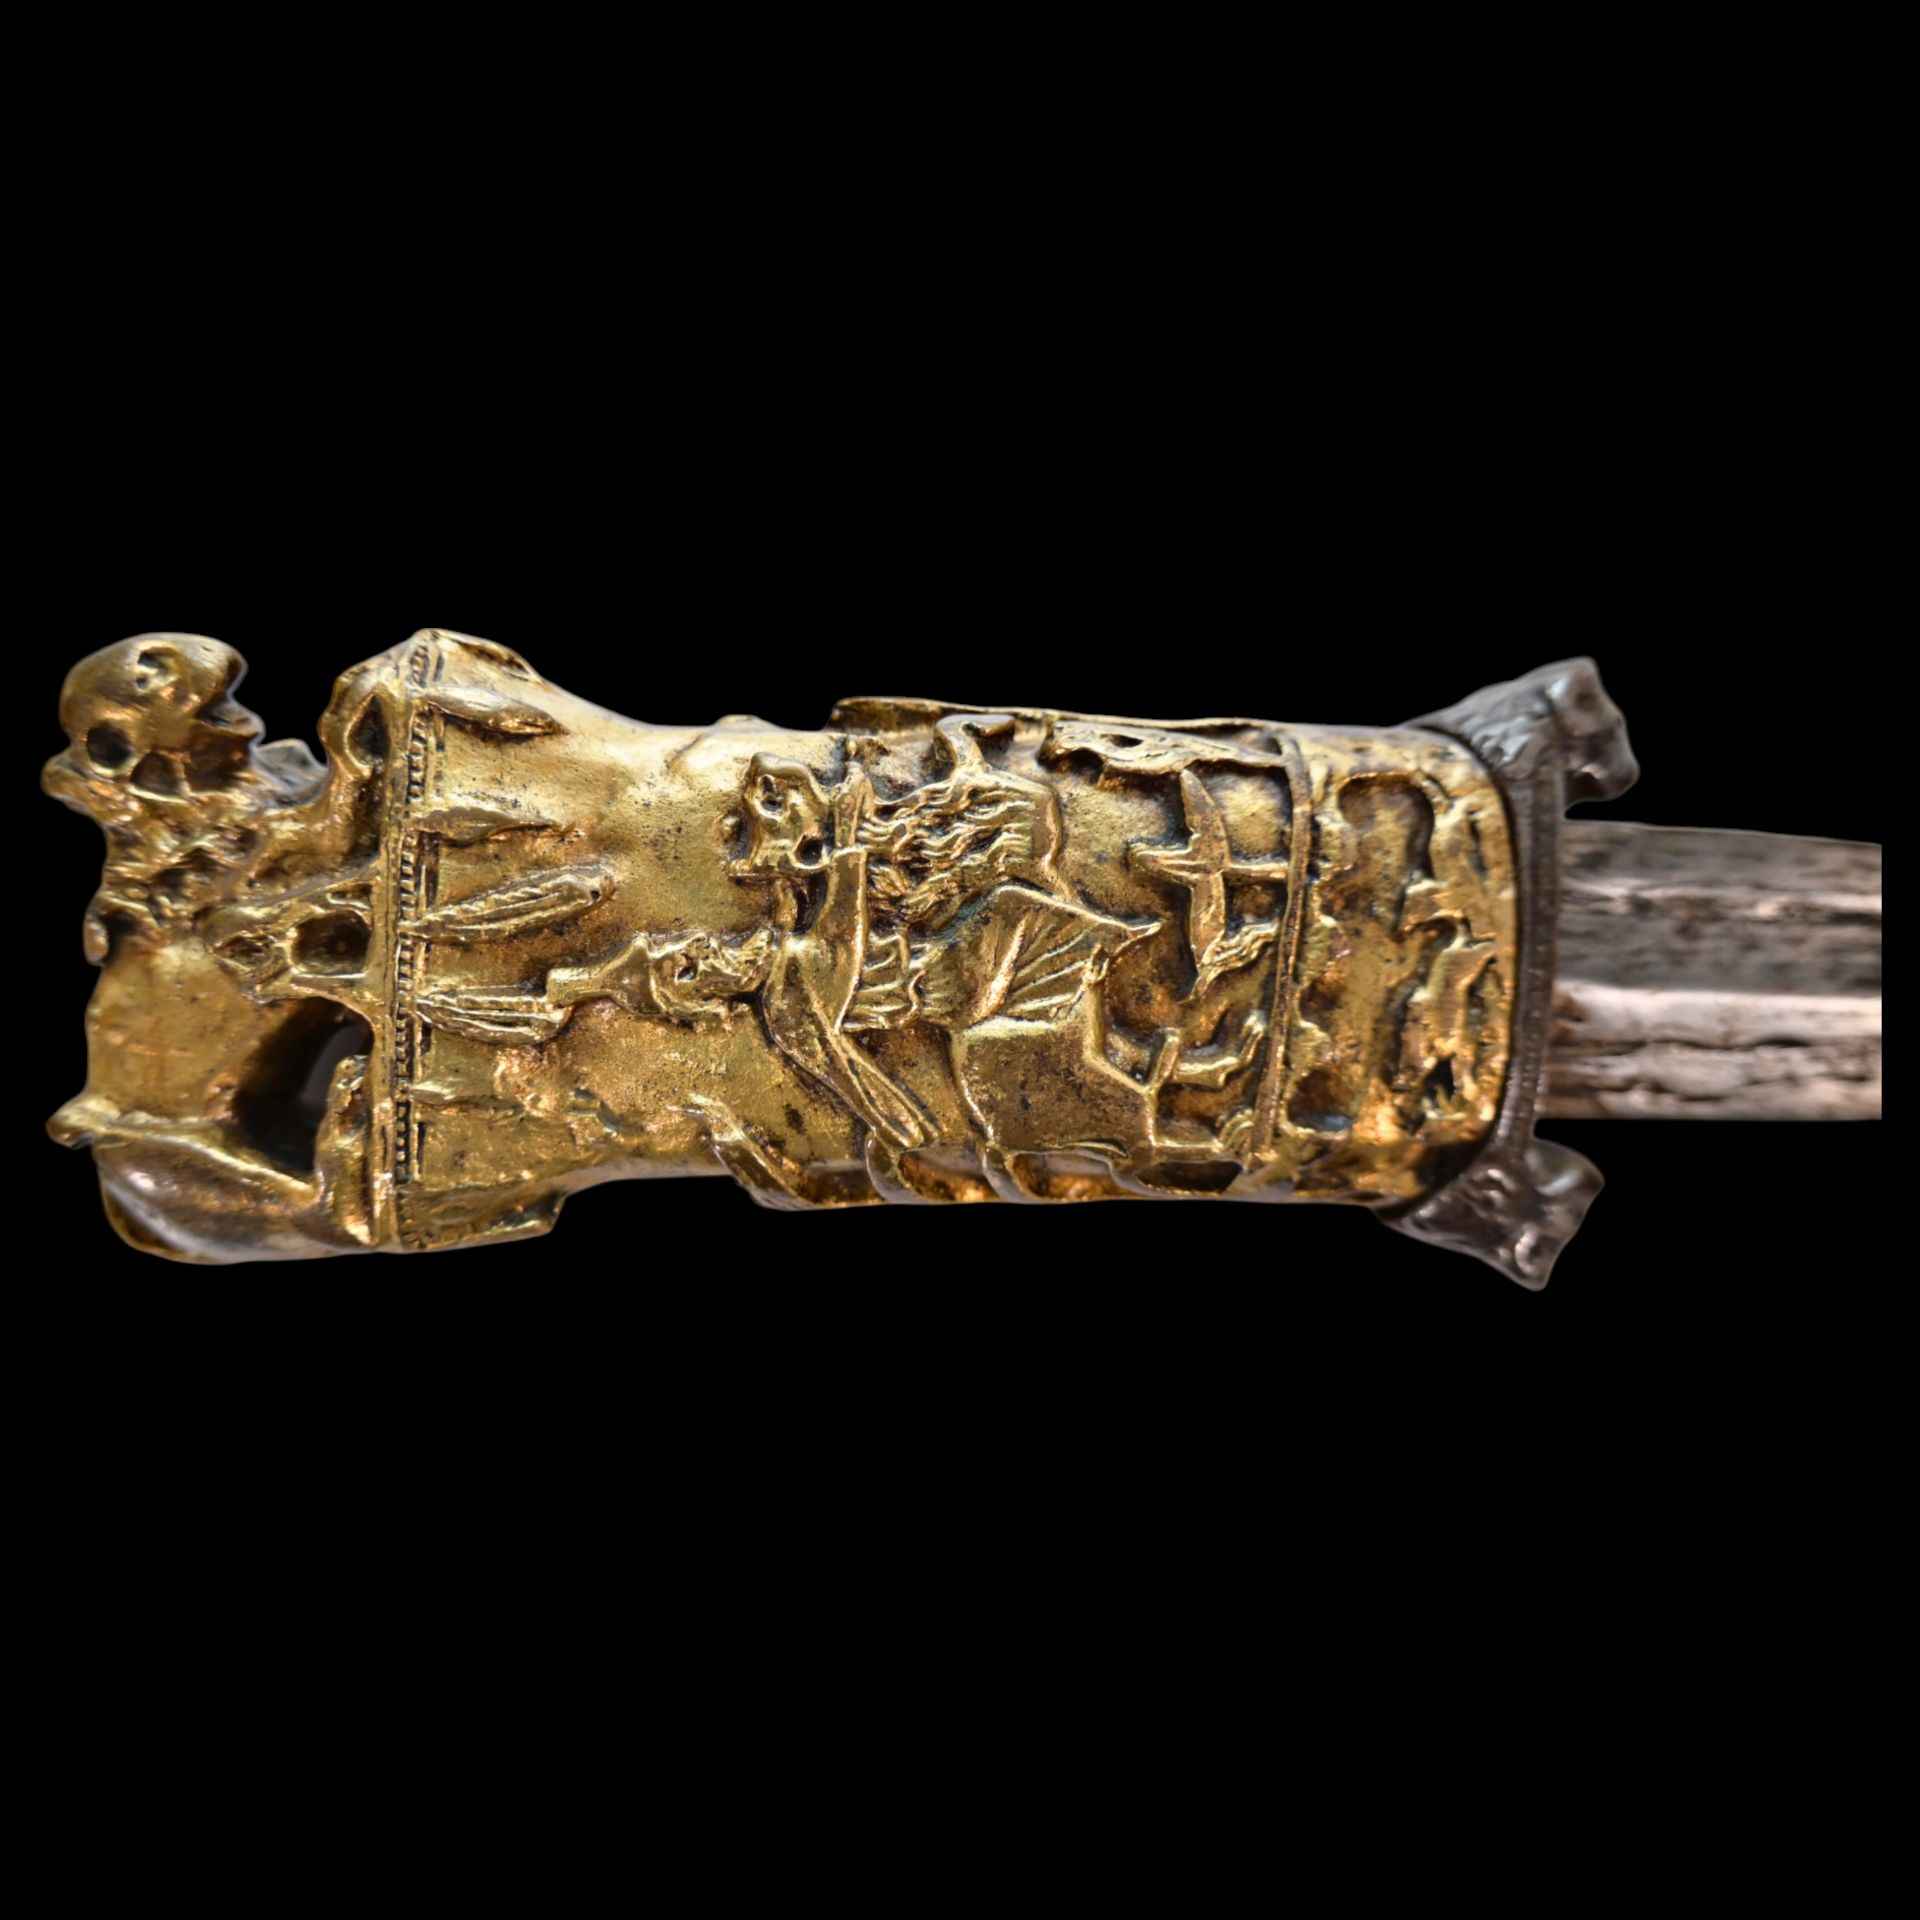 A magnificent dagger, probably from the period of the Crusades, Syria, 10th-13th (?) century. - Image 7 of 11